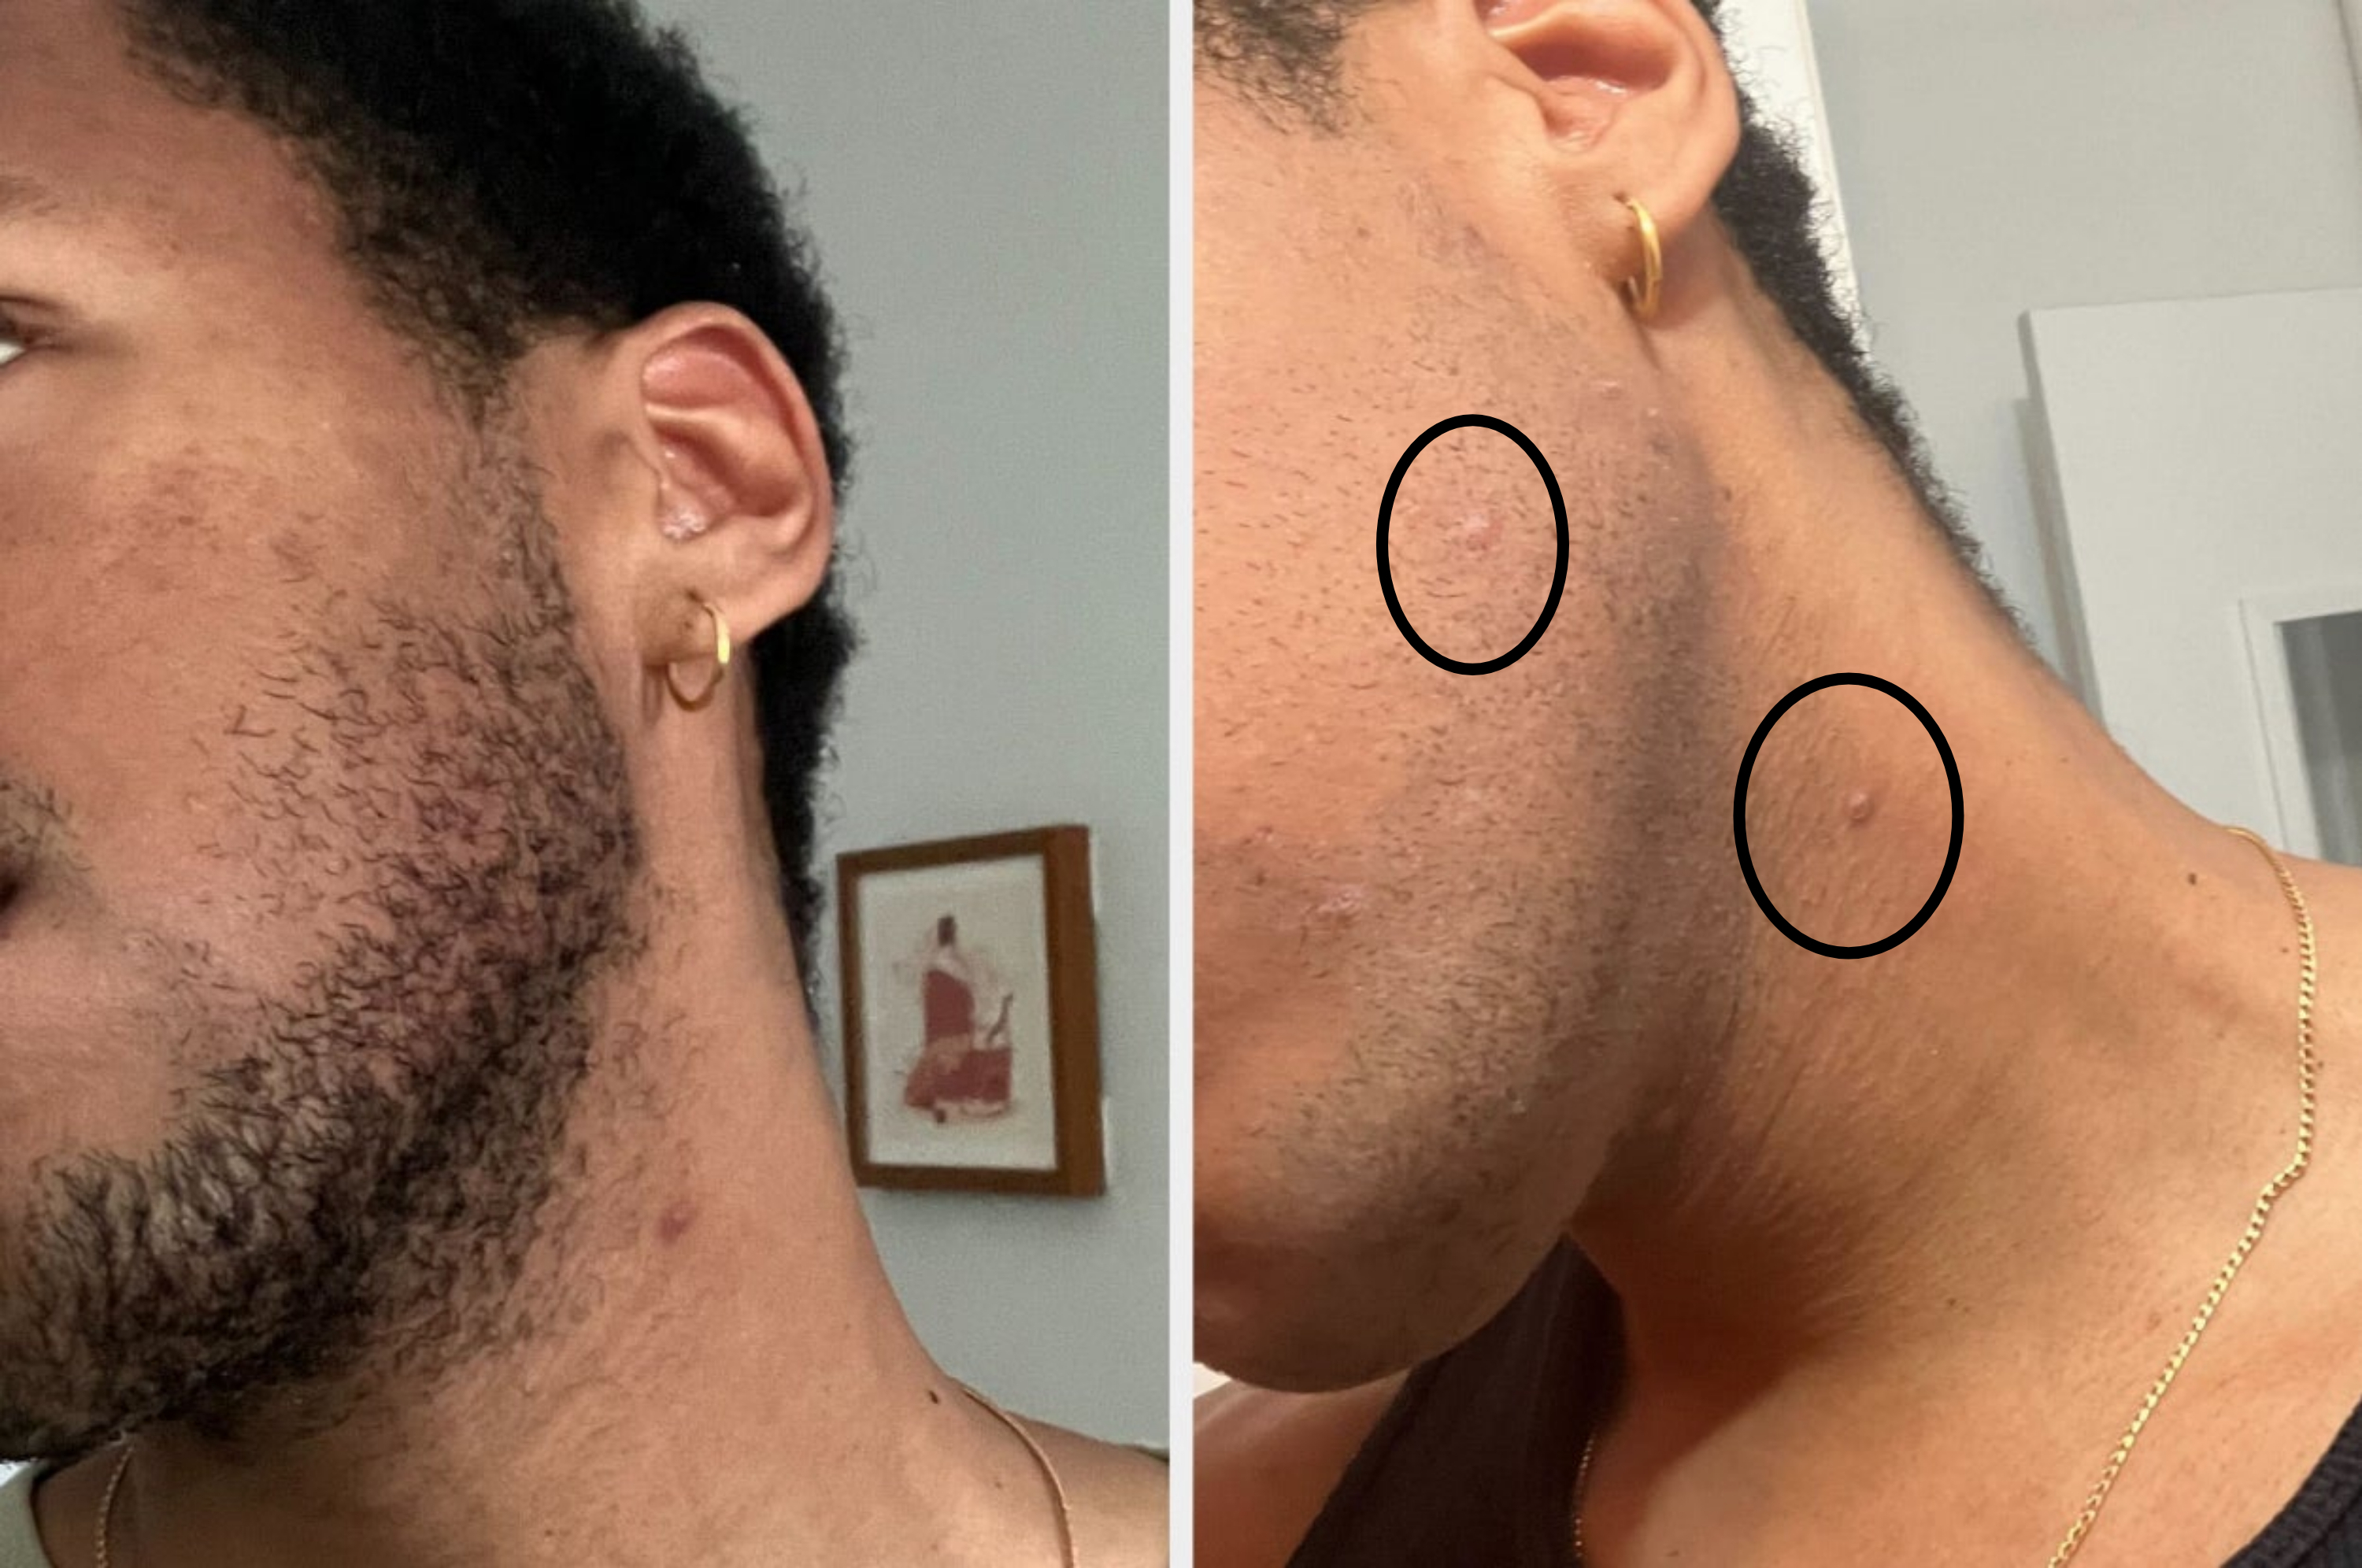 Close-up images showing a person&#x27;s face before and after beard grooming. The left image shows a thicker beard, while the right image shows a well-trimmed beard